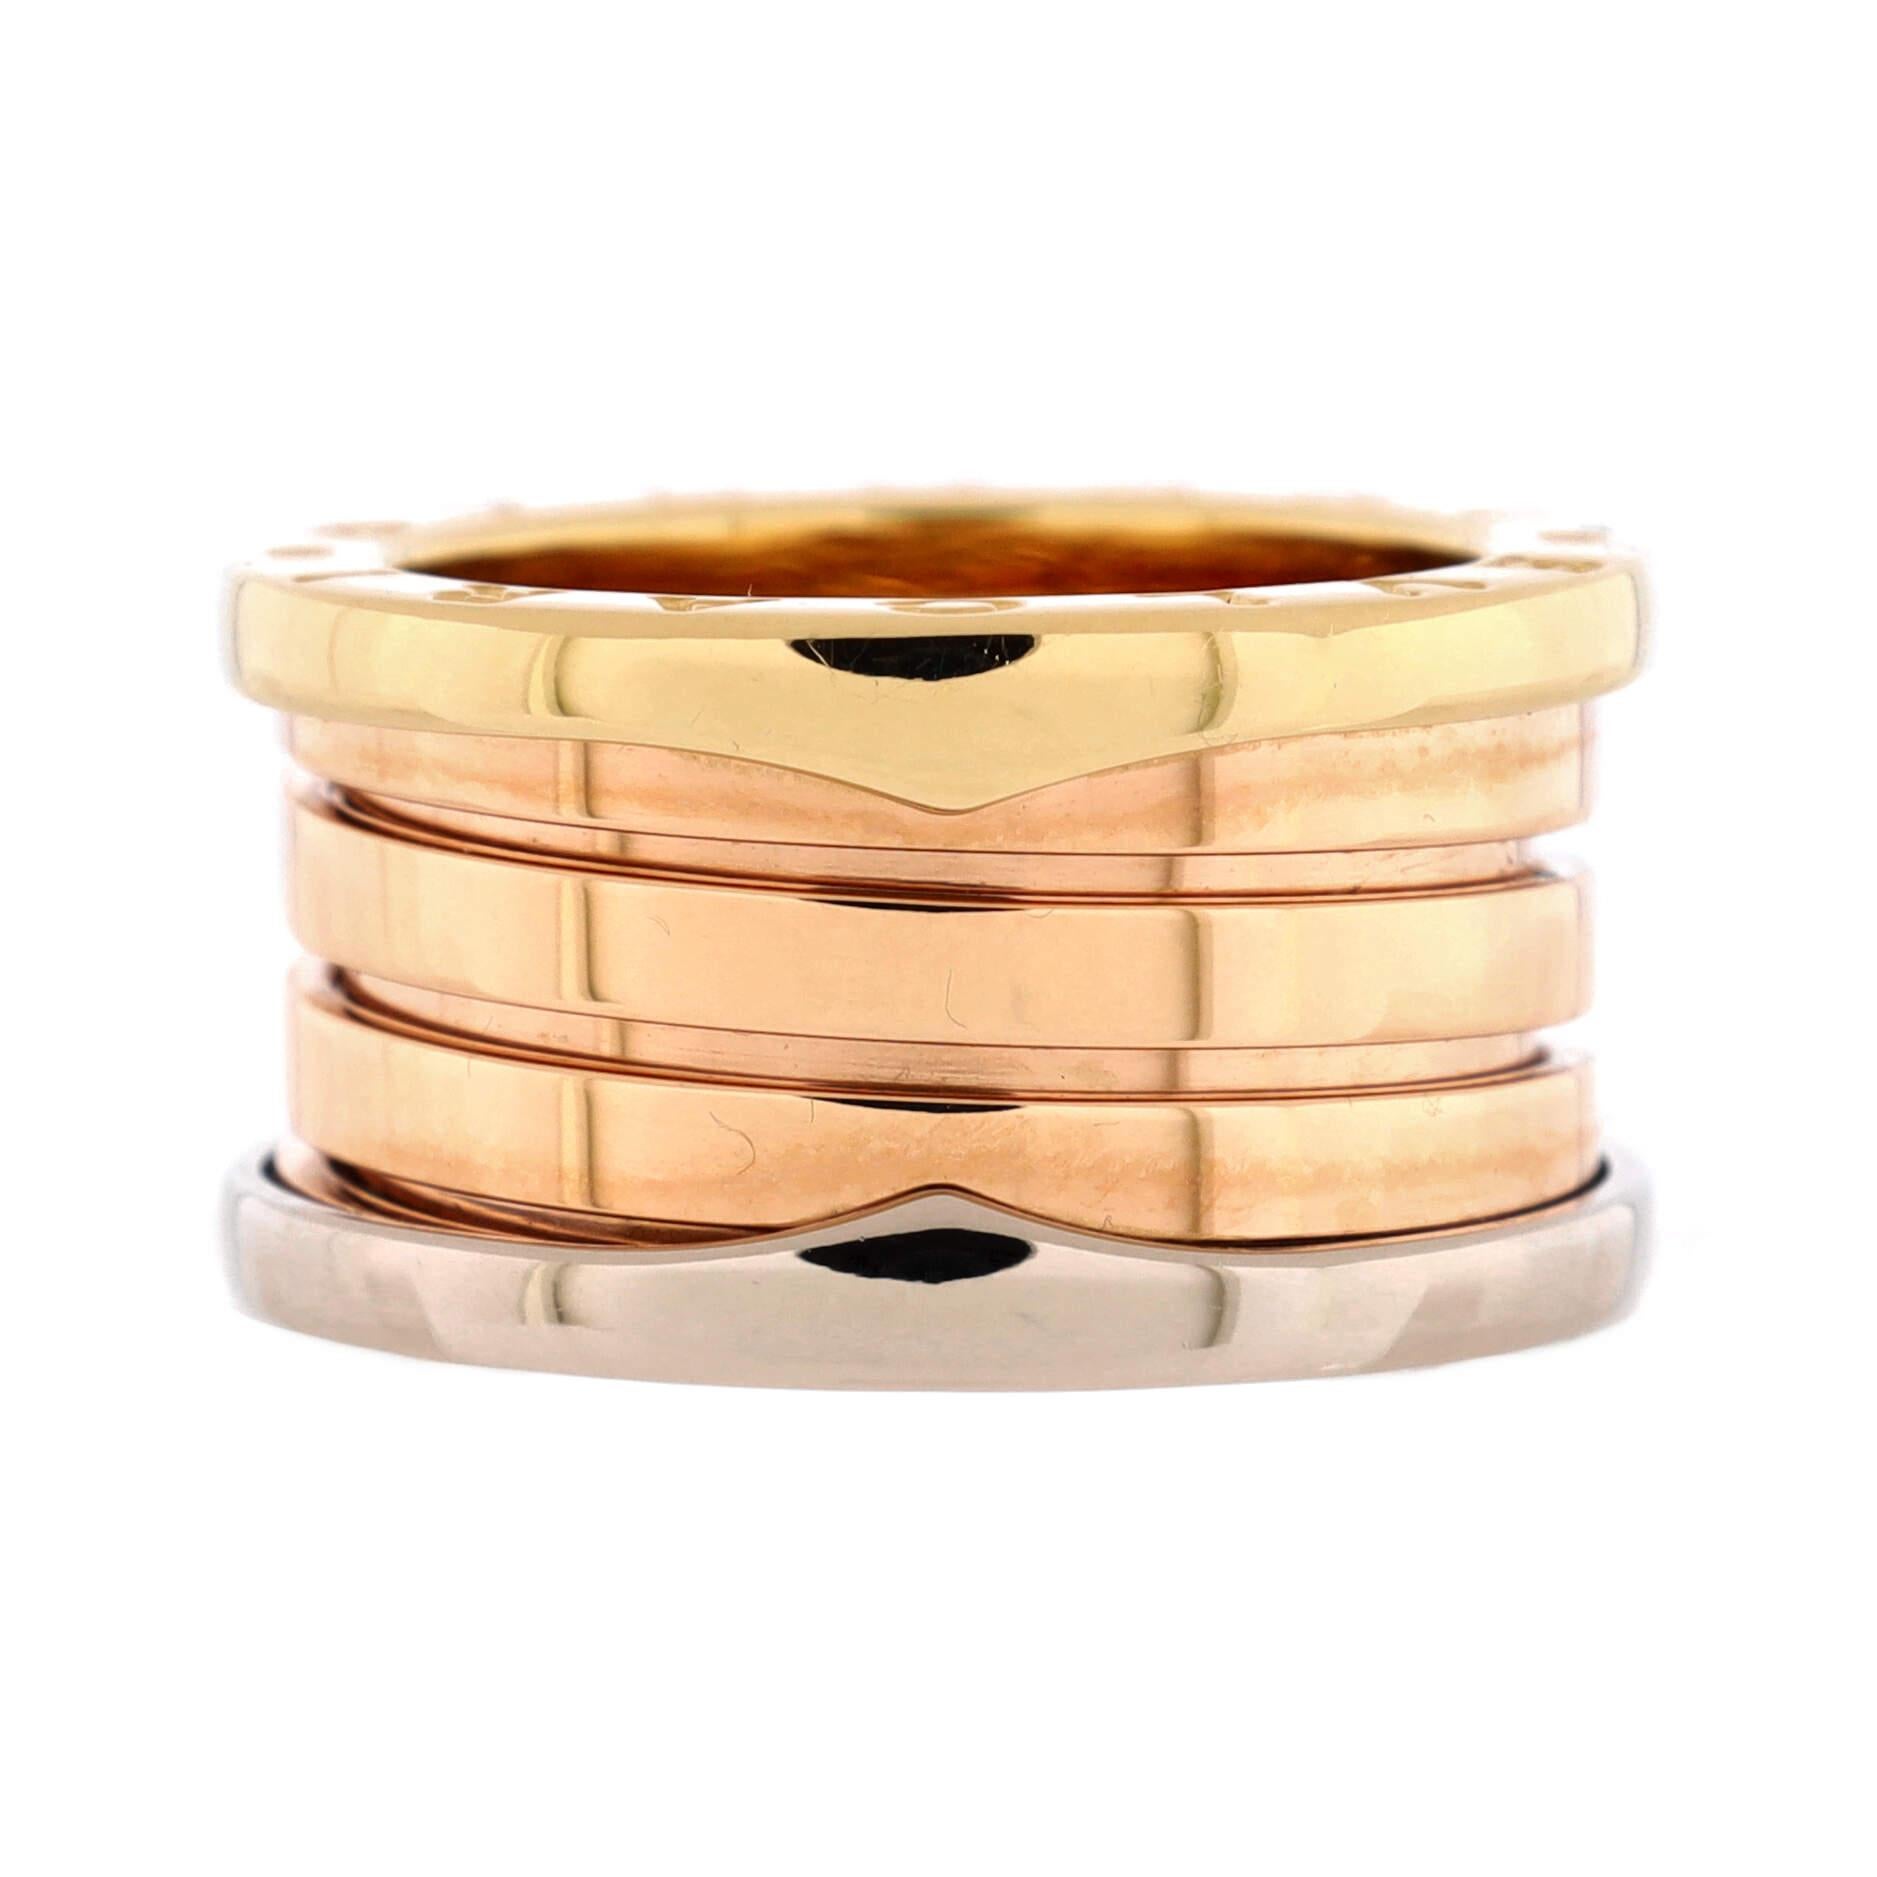 Condition: Great. Minor wear throughout.
Accessories: No Accessories
Measurements: Size: 5.25 - 50, Width: 11.30 mm
Designer: Bvlgari
Model: B.Zero1 Four Band Ring 18K Tricolor Gold
Exterior Color: Tricolor Gold
Item Number: 207235/8